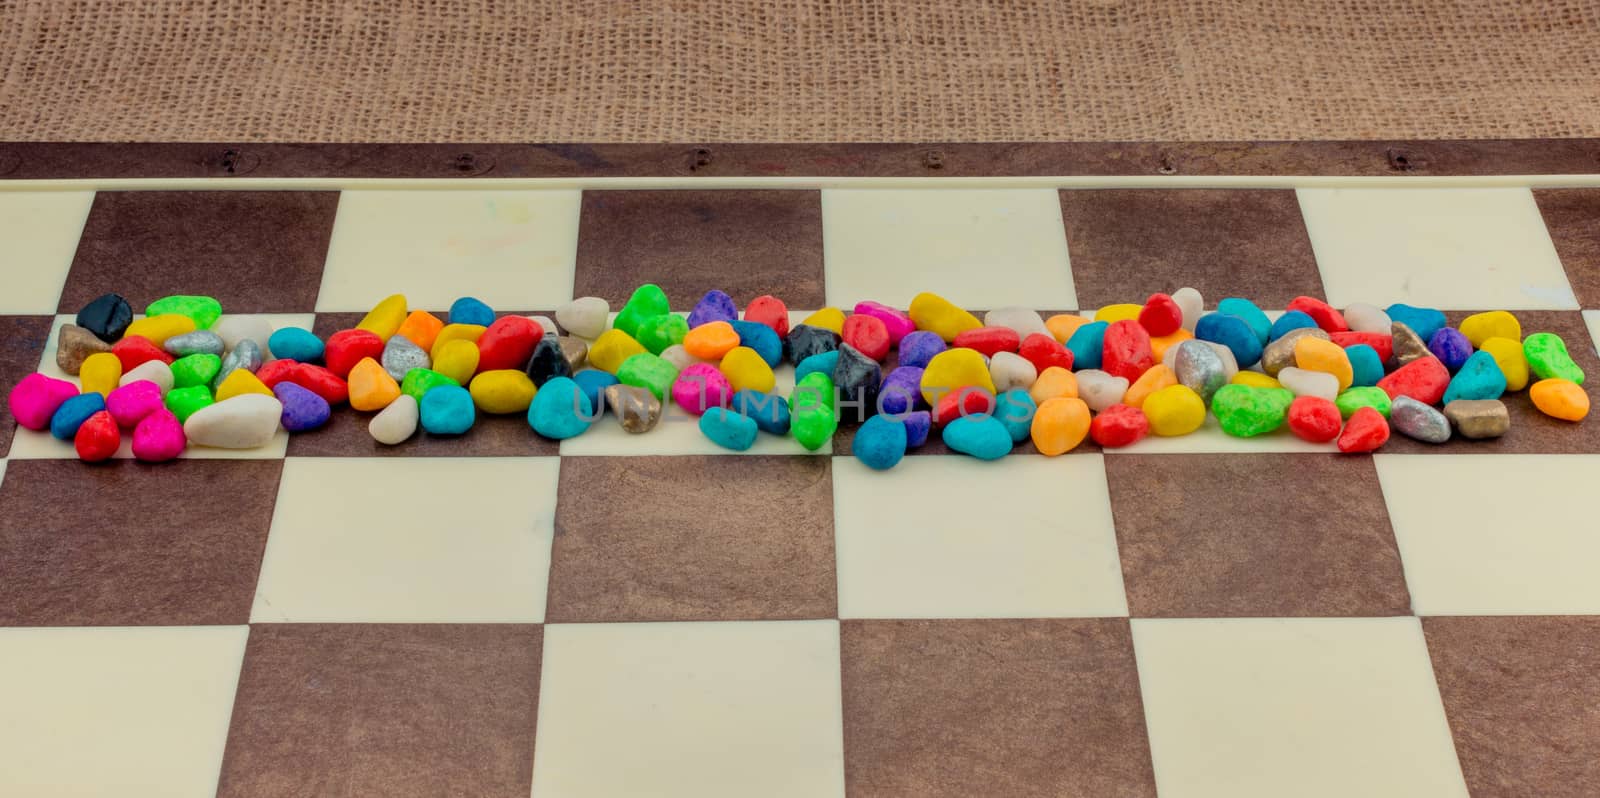 Colorful pebbles spread on checked board  by berkay